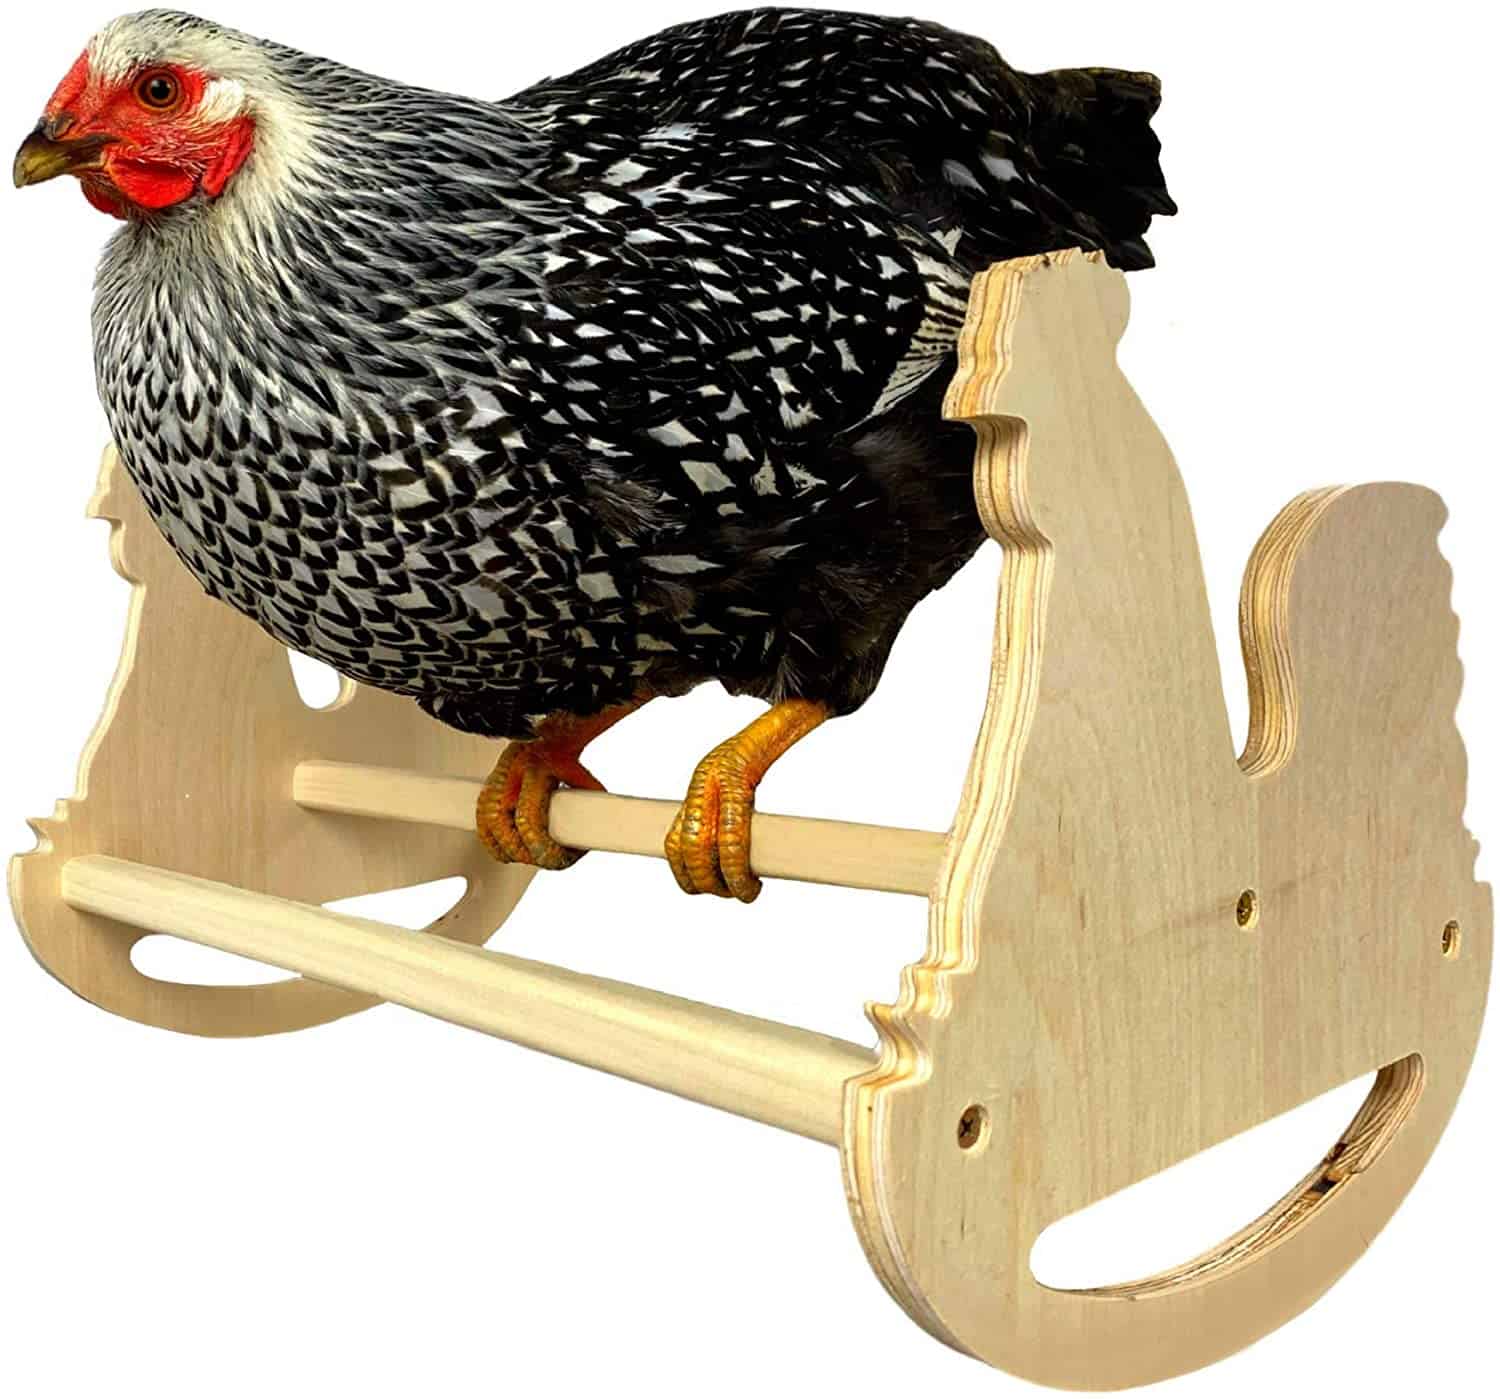 a rocking horse roosting bar is a fun toy for a chicken